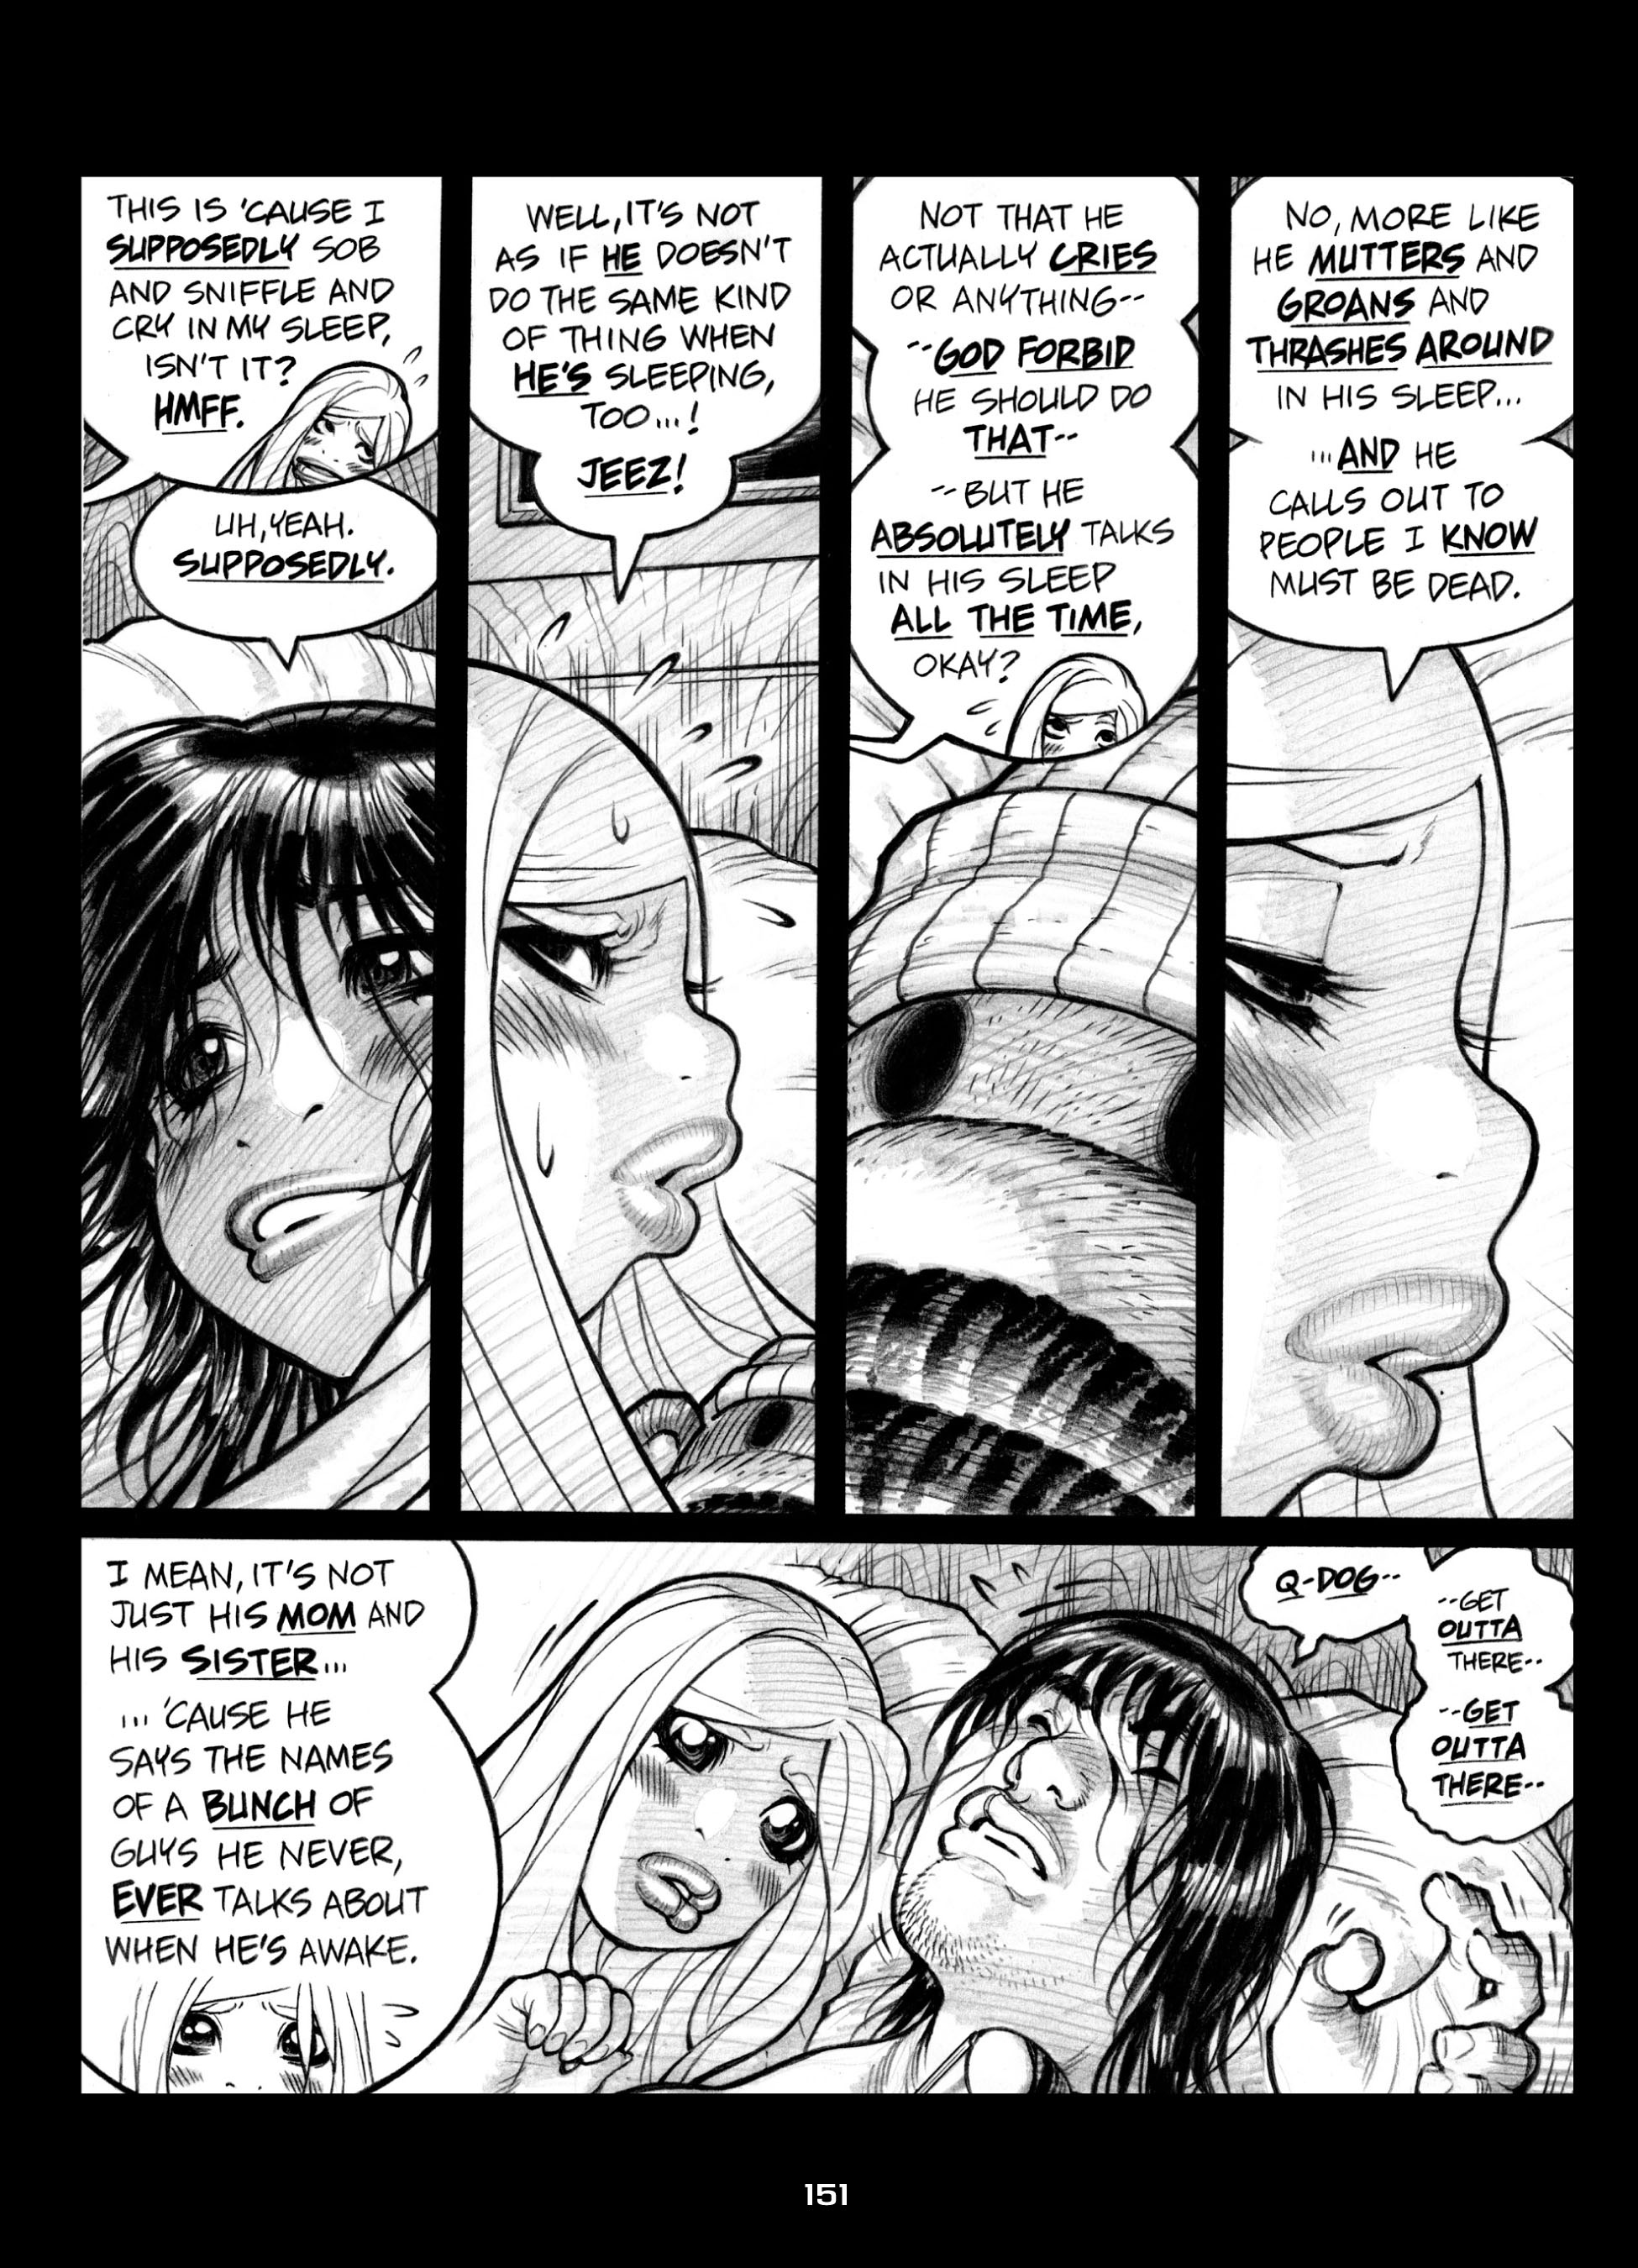 Read online Empowered comic -  Issue #7 - 151